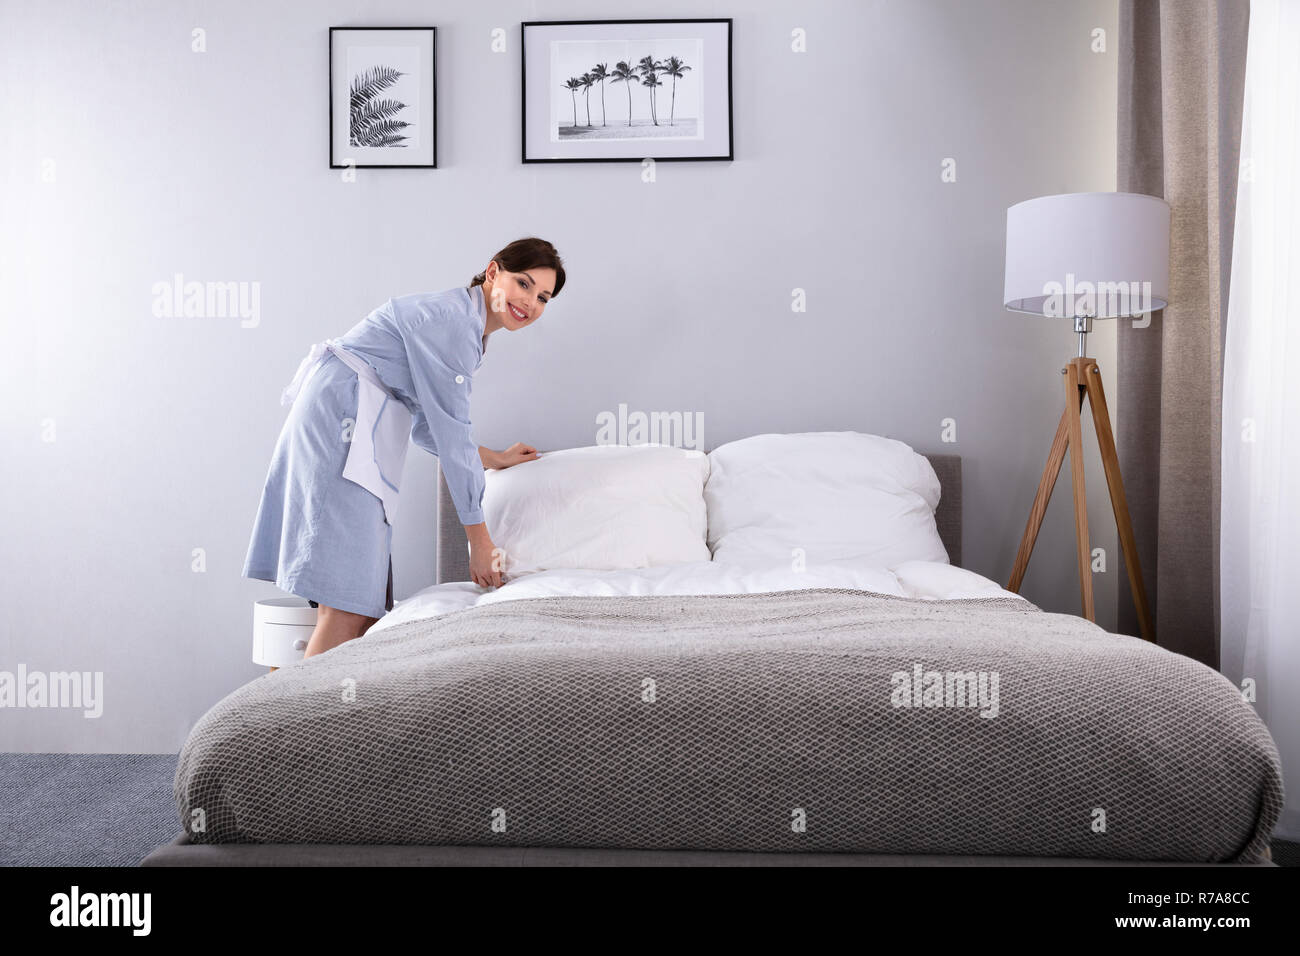 Smiling Female Housekeeper Making Bed In Hotel Room Stock Photo